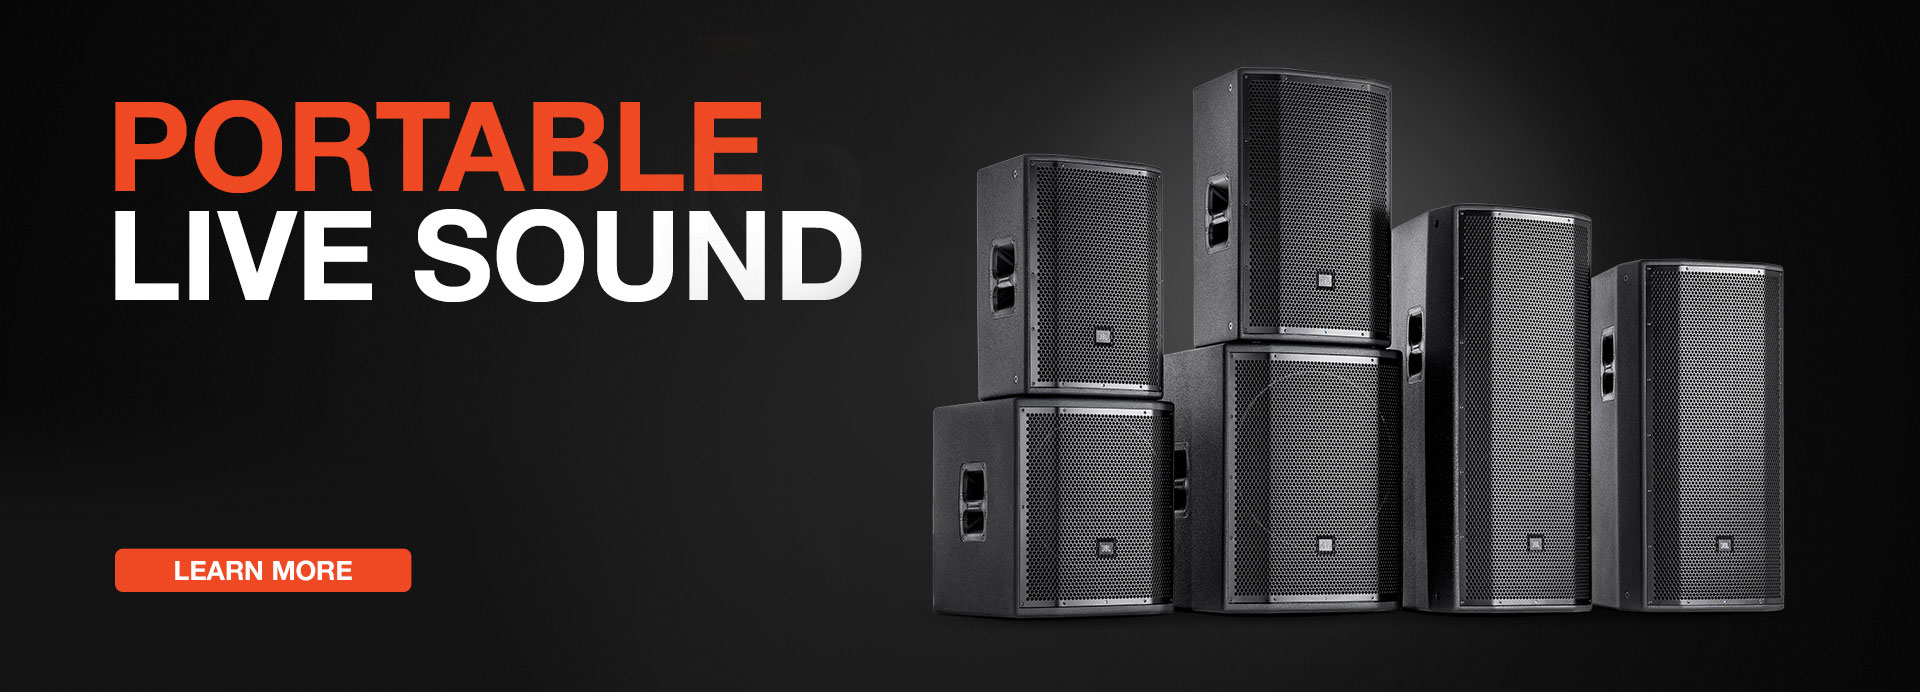 products_homepage_slide_live_portable_sound